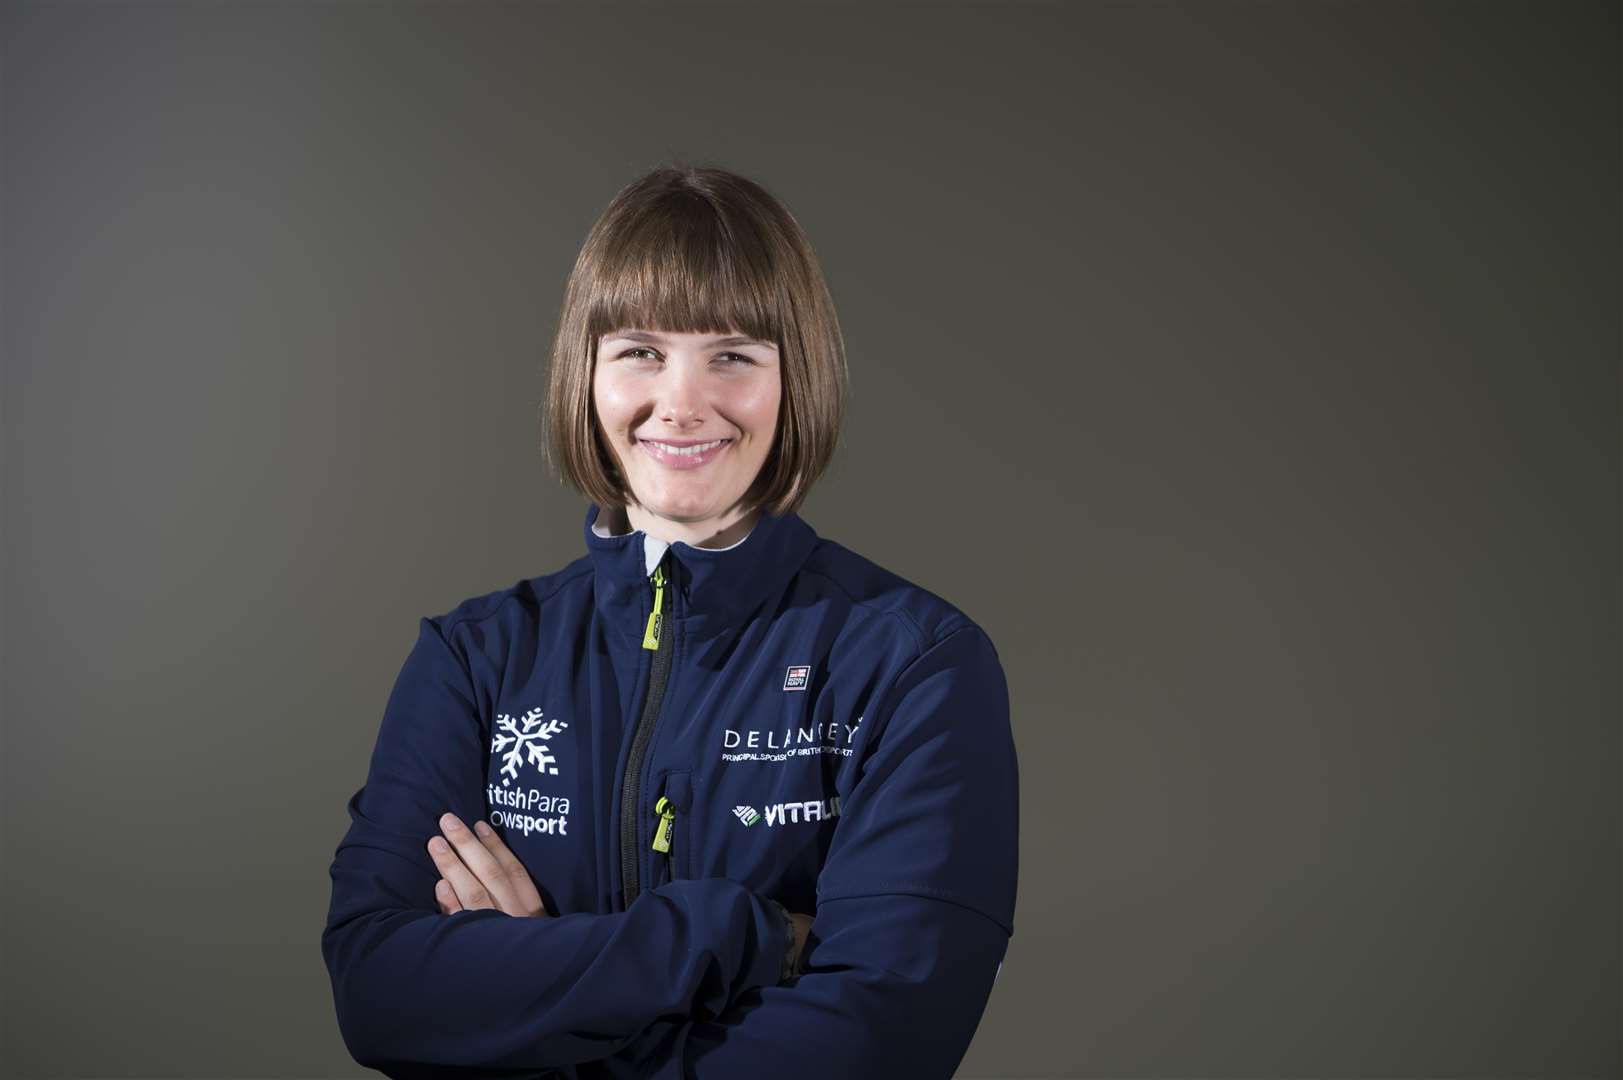 Winter Paralympian and downhill skiiing world champion Millie Knight will speak at the Kent B2B (6469969)